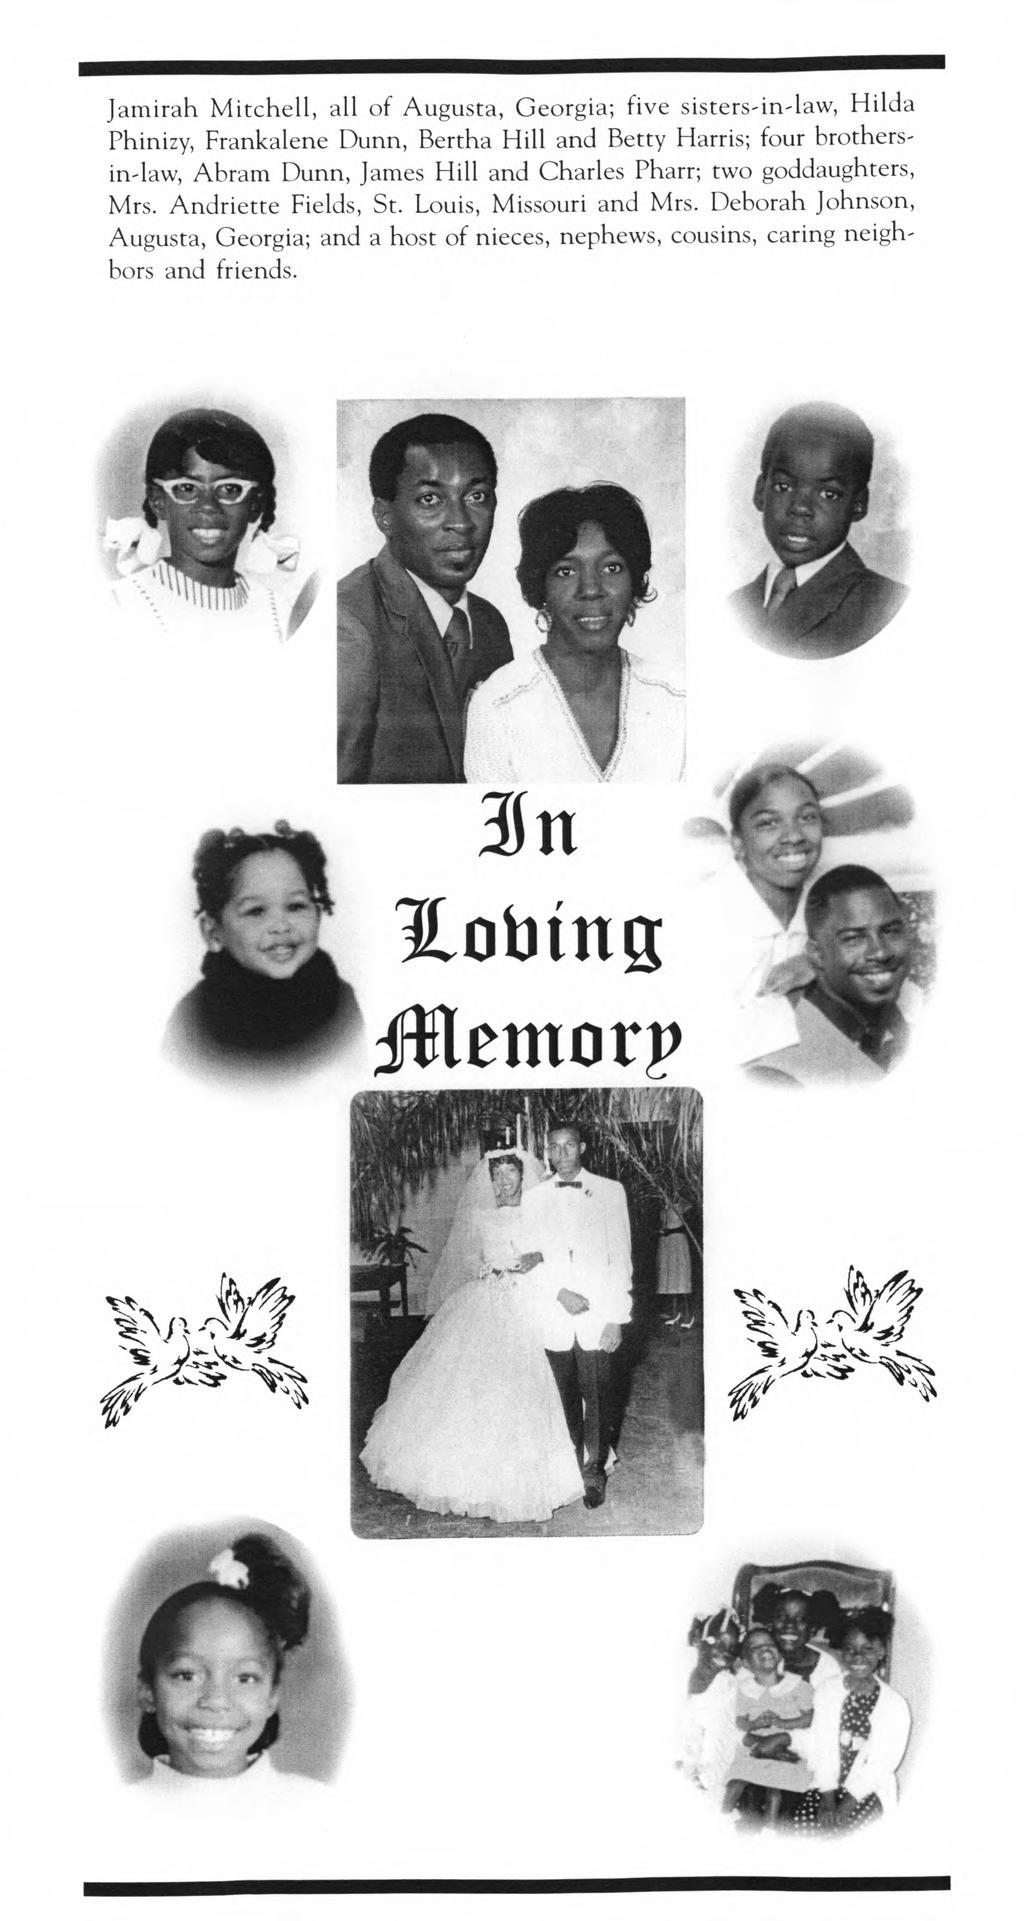 Jamirah Mitchell, all of Augusta, Georgia; five sisters-in-law, Hilda Phinizy, Frankalene Dunn, Bertha Hill and Betty Harris; four brothersin-law, Abram Dunn, James Hill and Charles